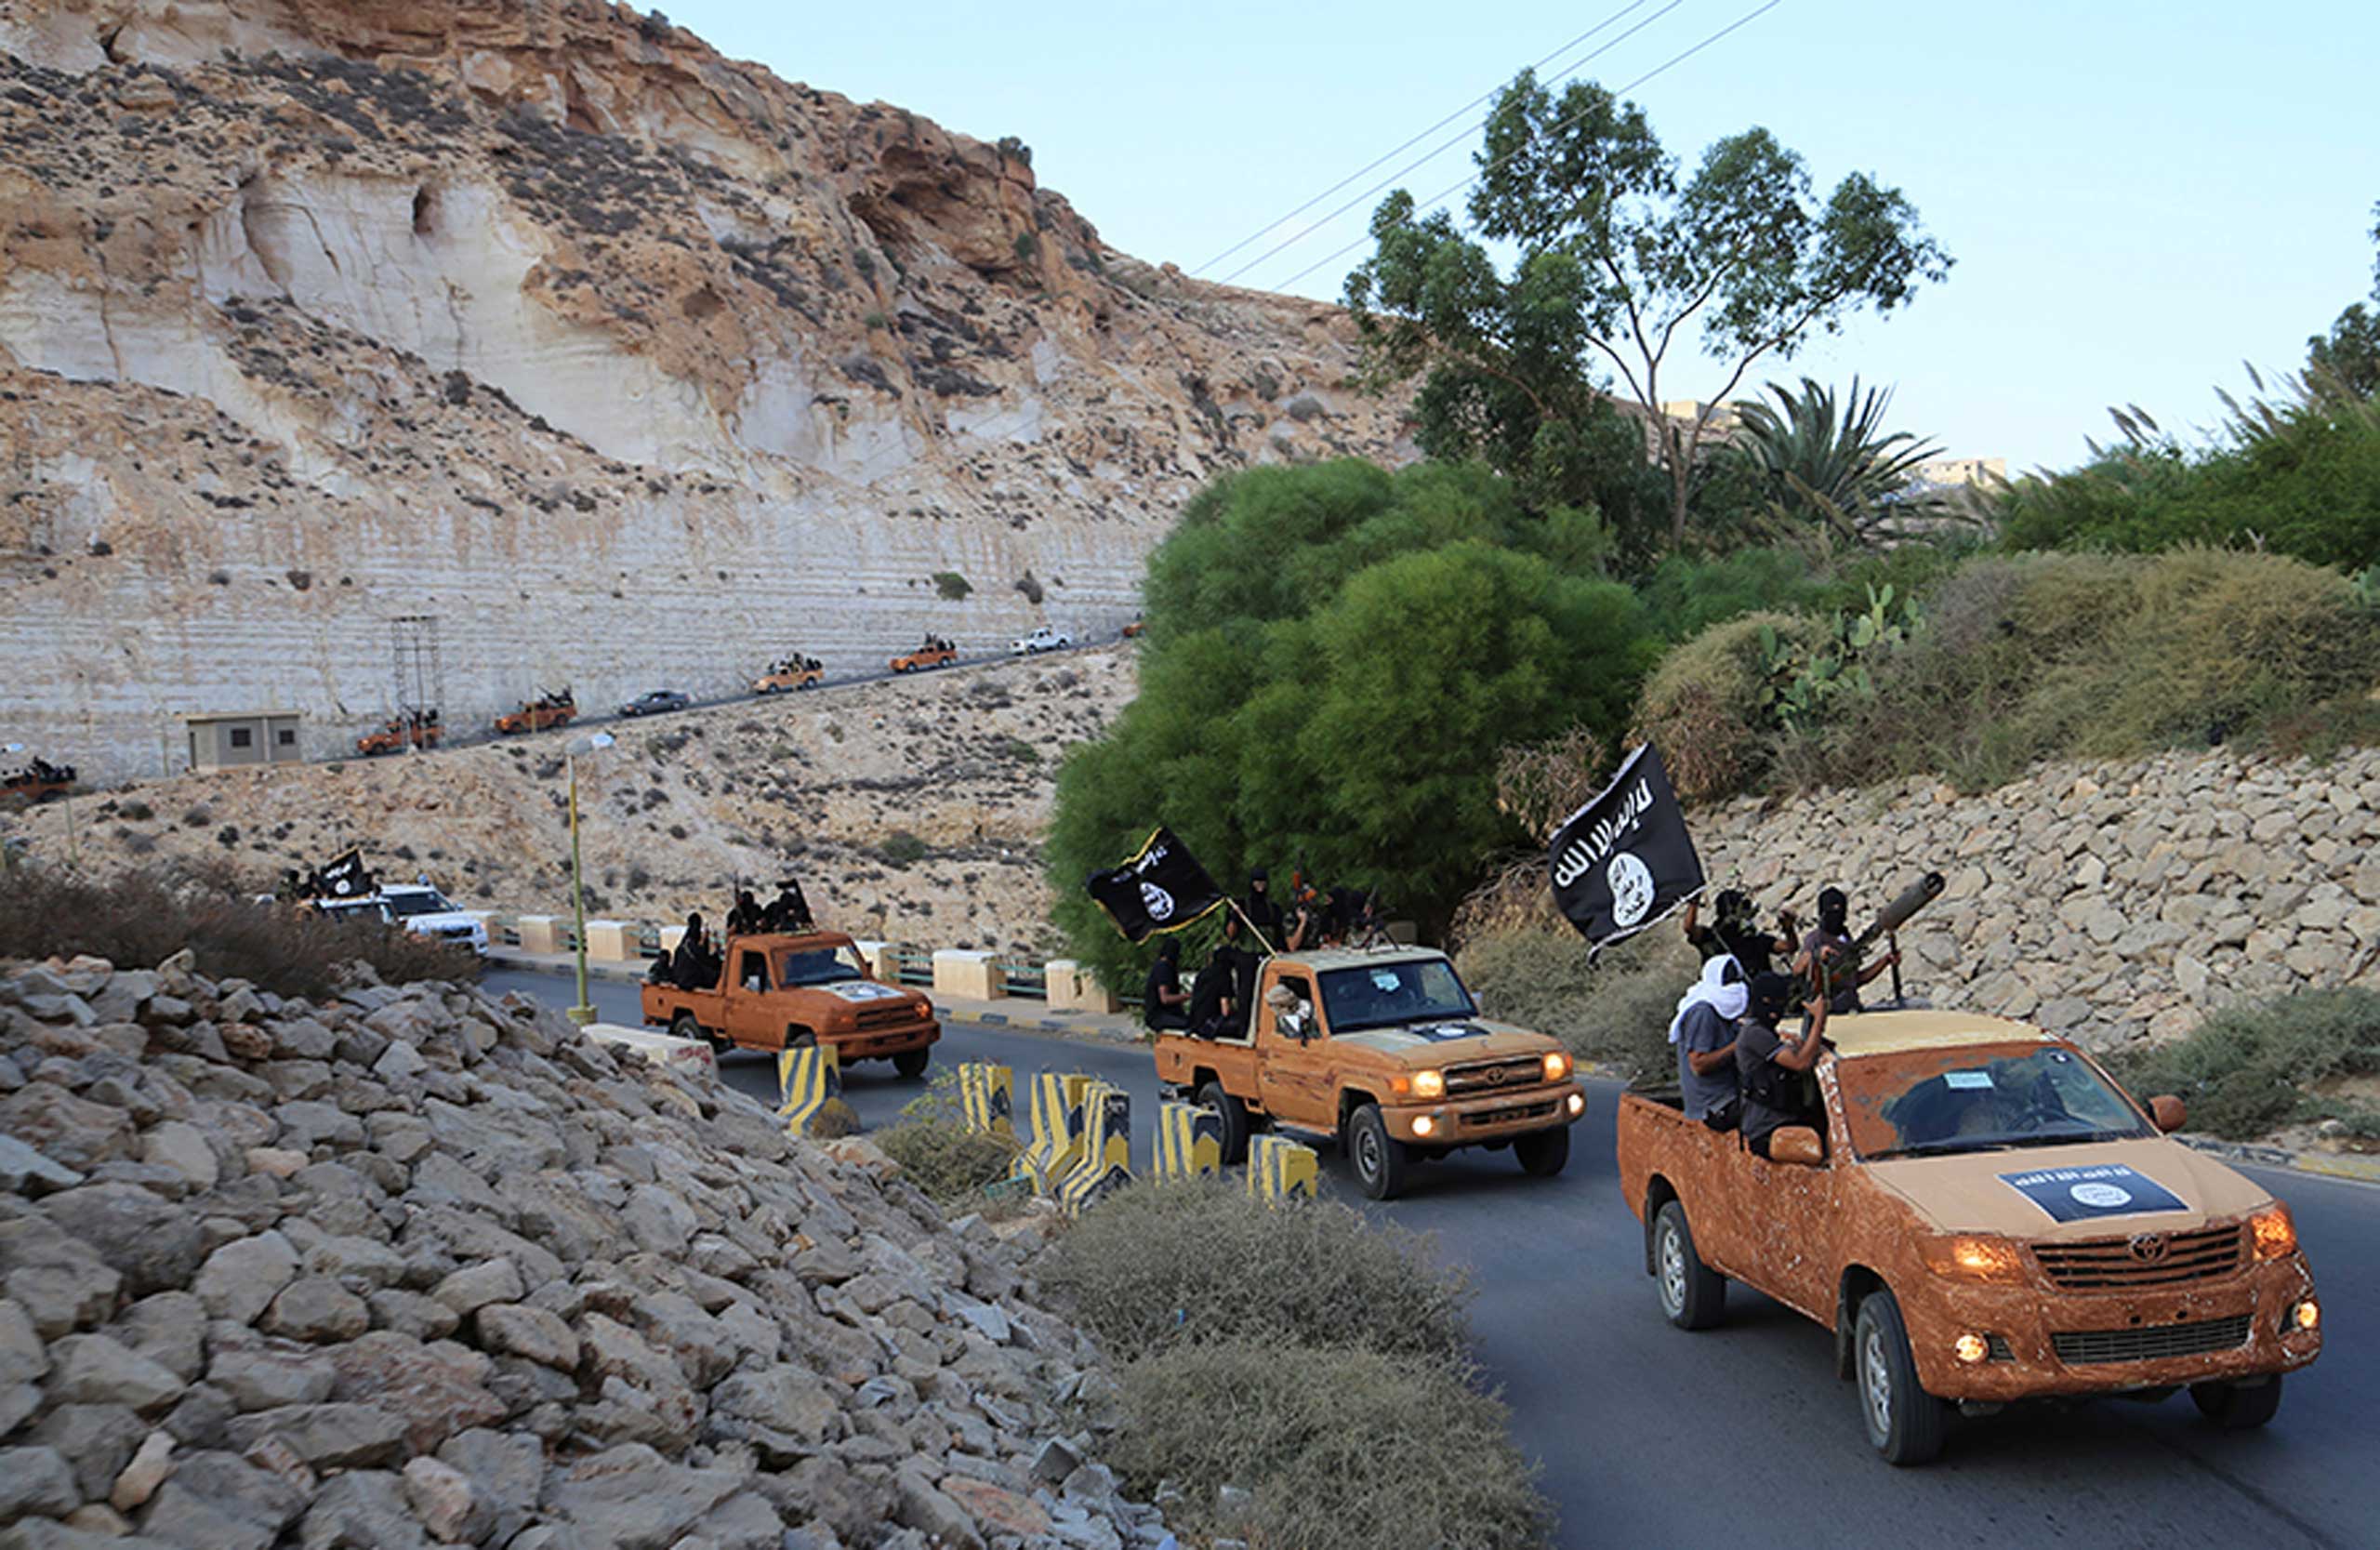 An armed motorcade belonging to members of Darna's Islamic Youth Council, which pledged allegiance to the Islamic State, drive along a road in Derna, eastern Libya, Oct. 3, 2014. (Reuters)